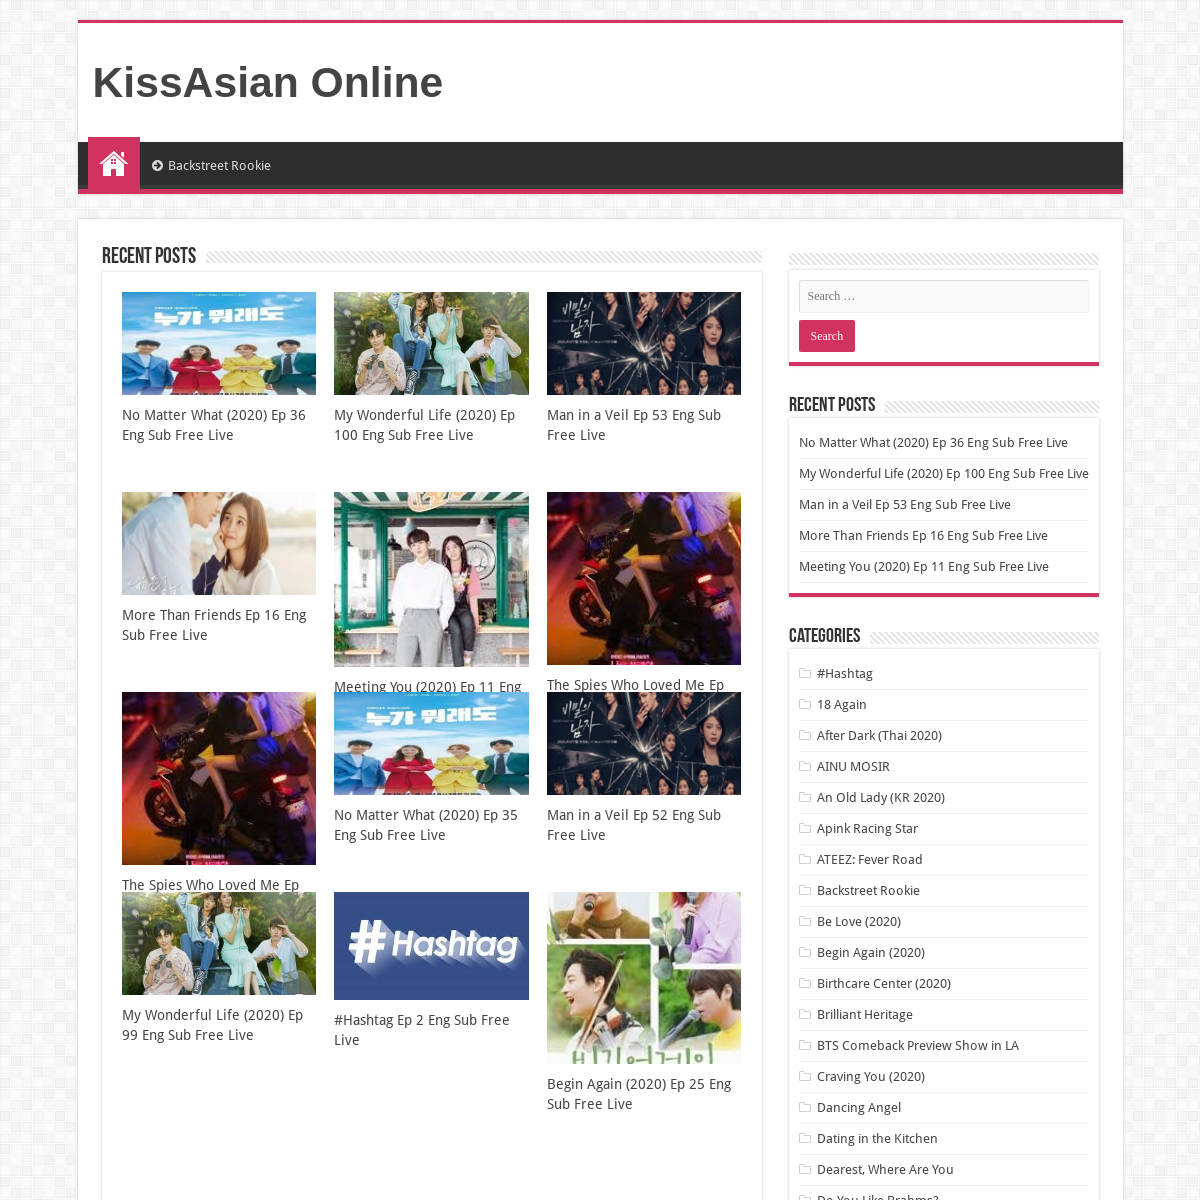 downdload from kissasian